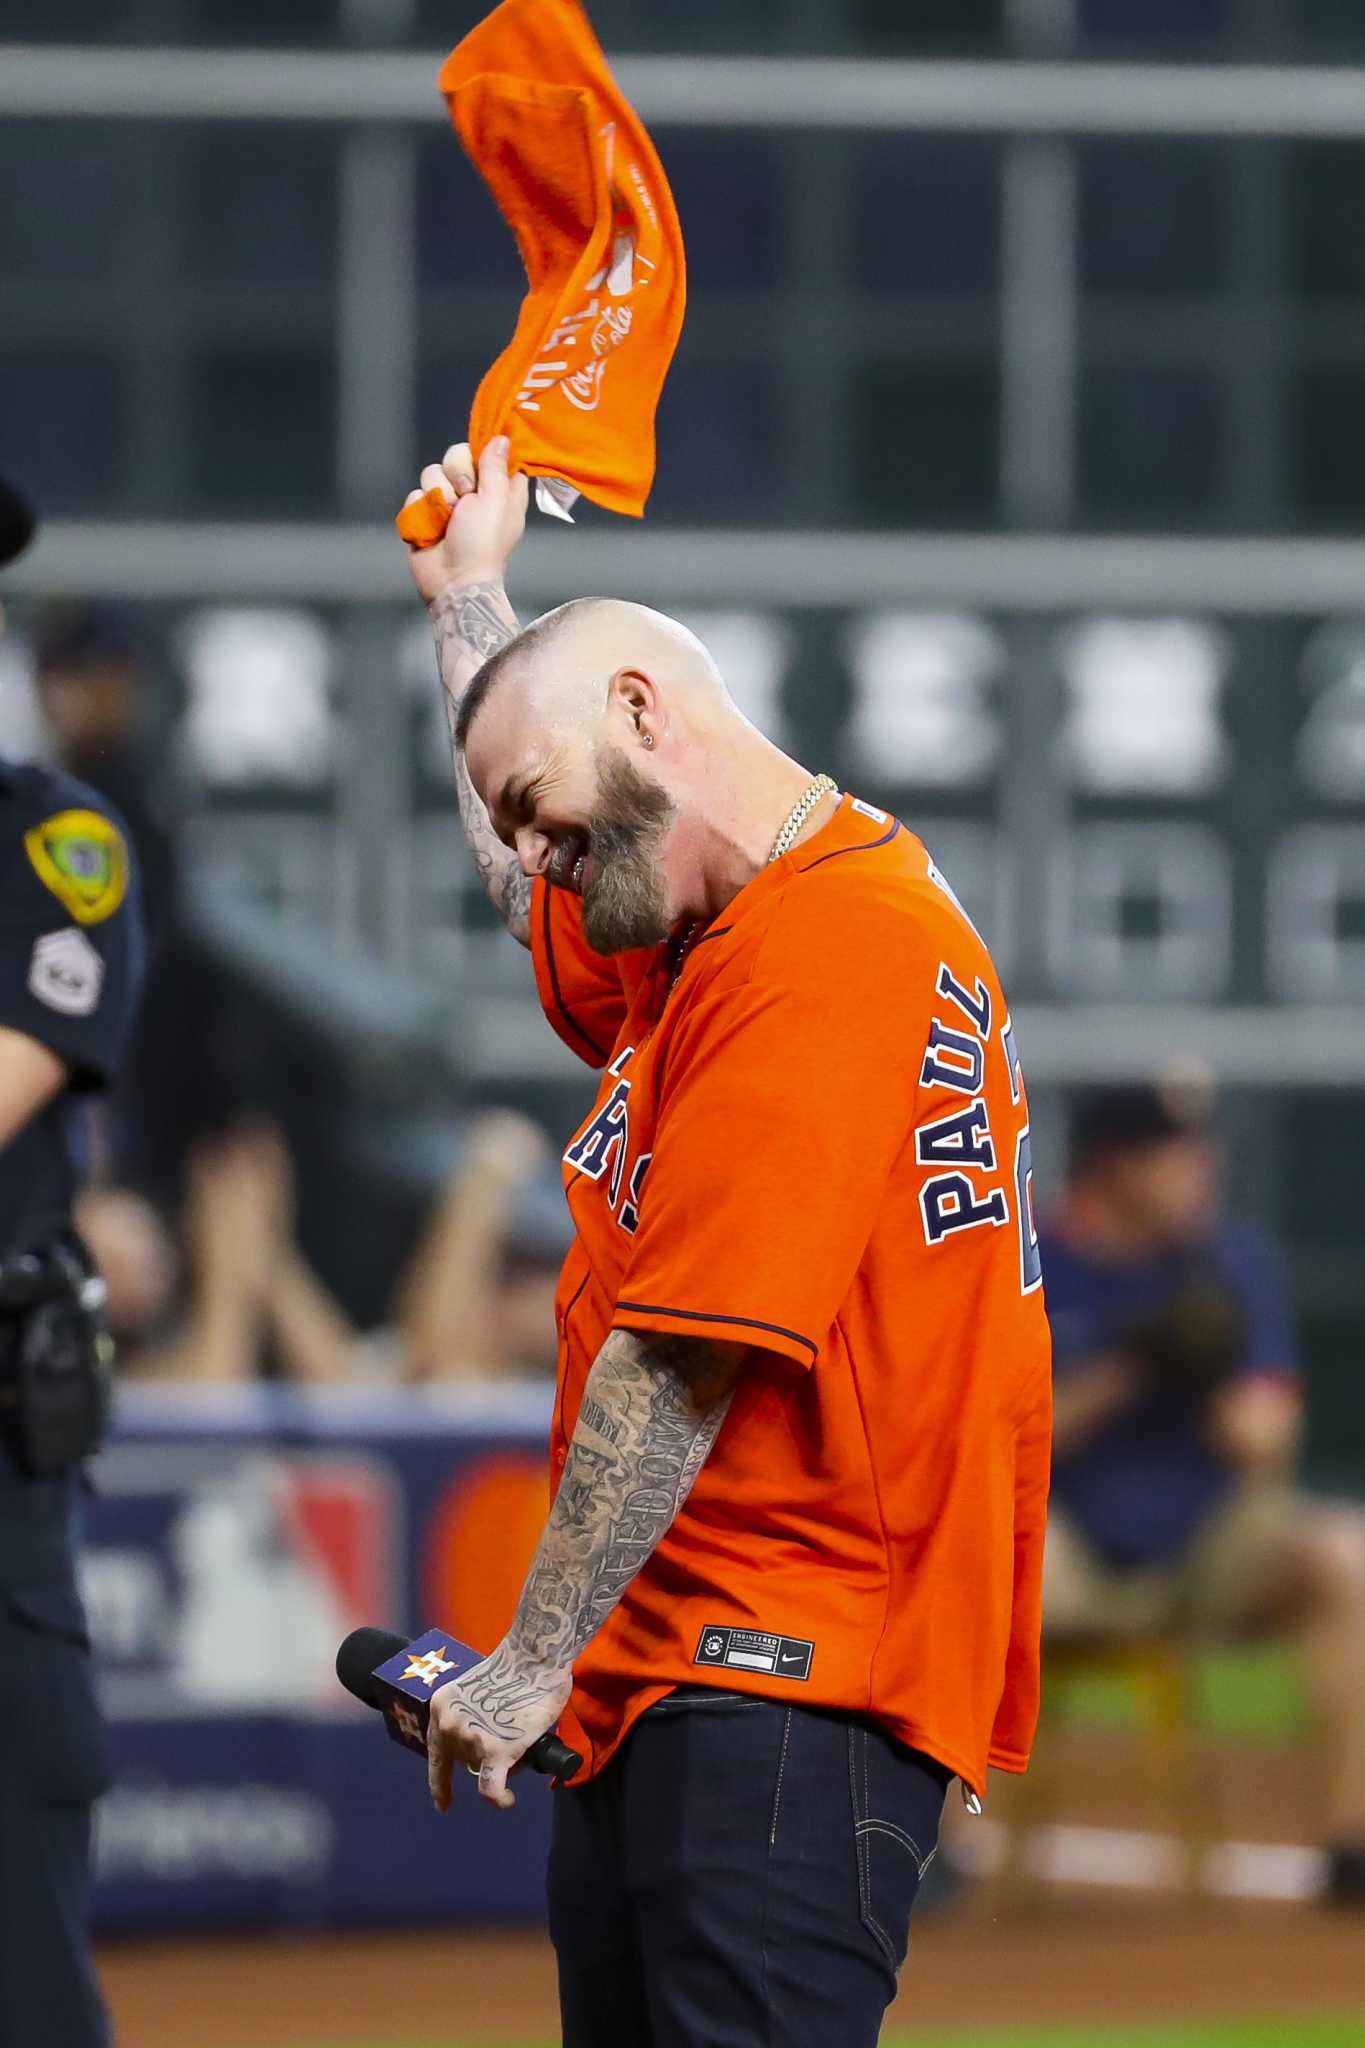 Paul Wall to represent Breggy Bomb at rodeo cook-off for Alex Bregman